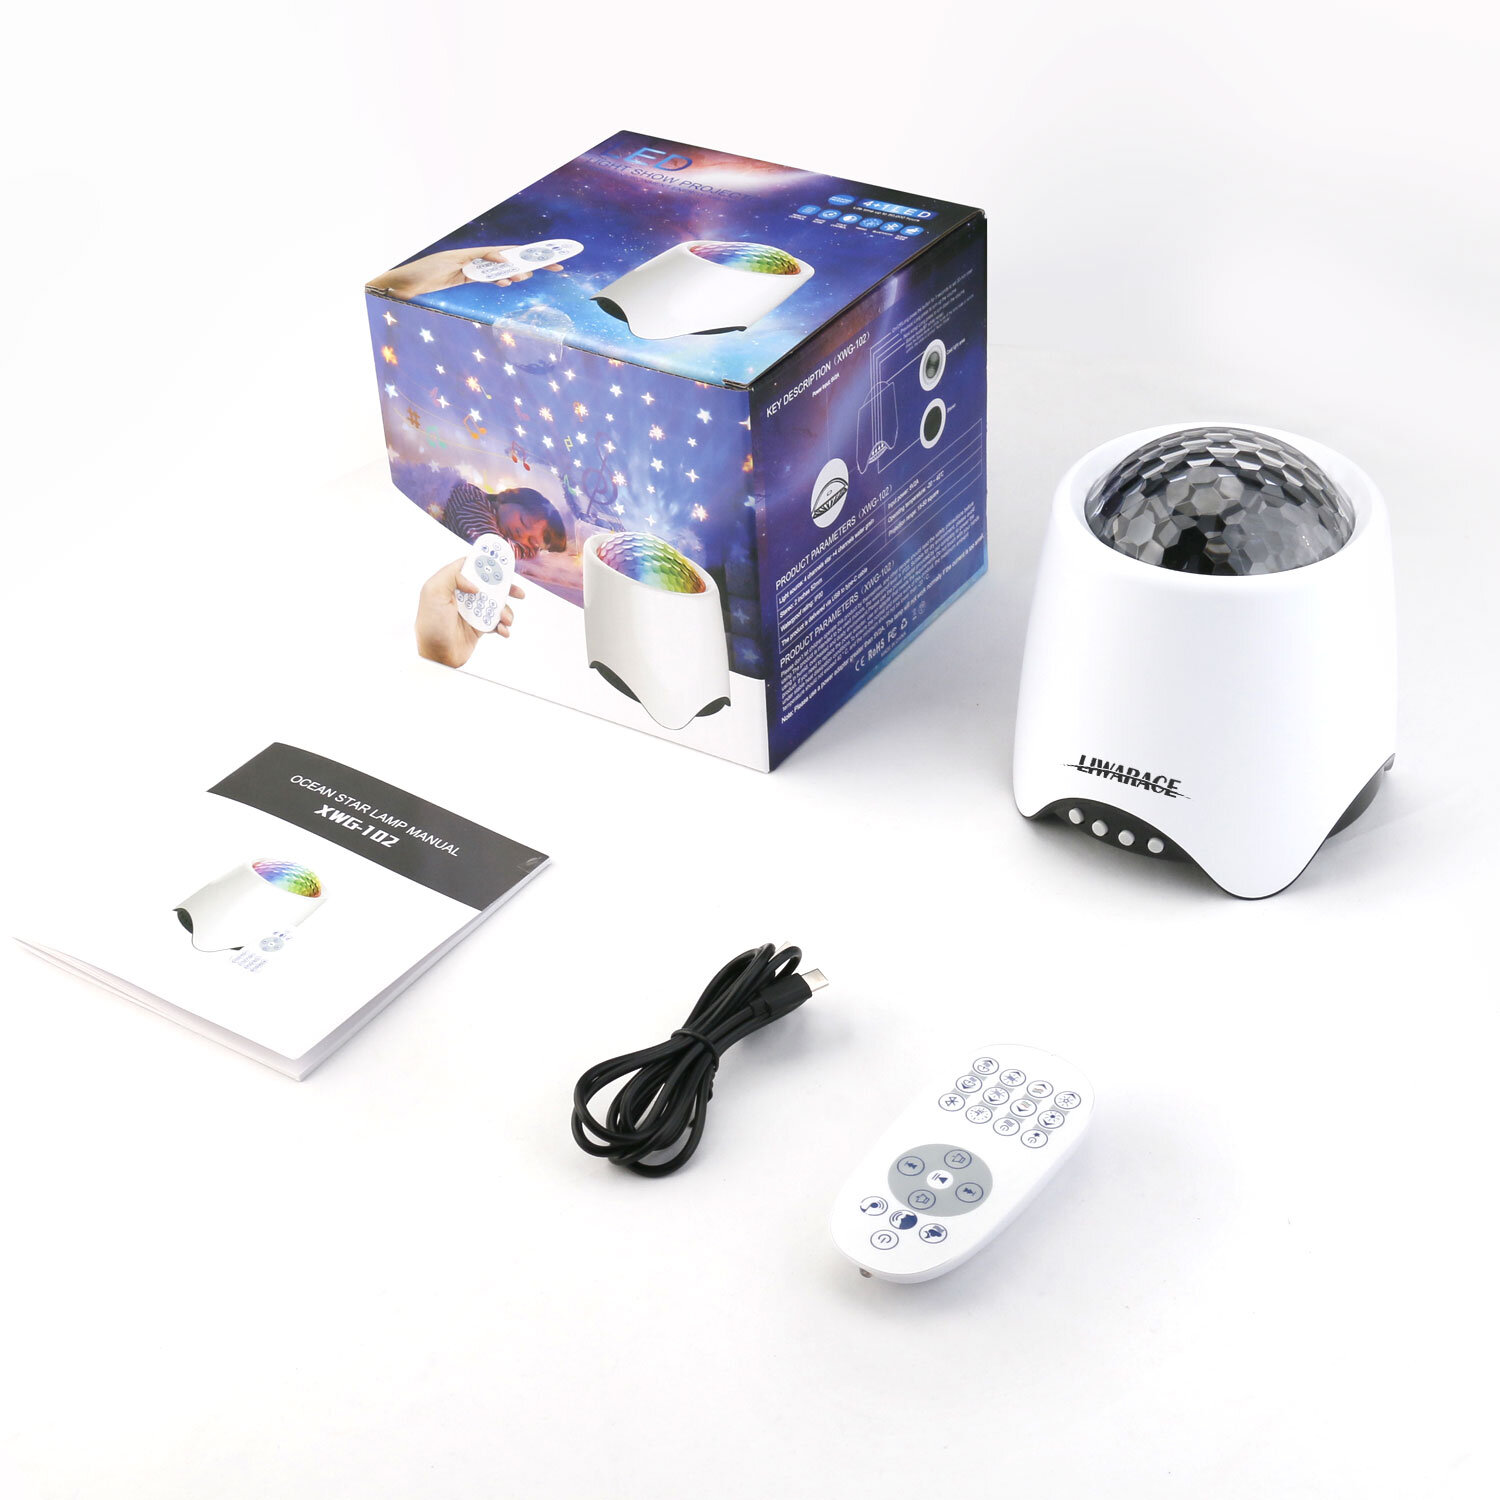 streepje Idioot Teken Liwarace 2-In-1 Star Projector And Sound Machine, Htwon Night Light For  Kids Adult Bedroom With 8 White Noise, 8 Soothing Music, Bluetooth Speaker,  Starry Star Light Ocean Wave Projector For Baby Sleeping | Wayfair